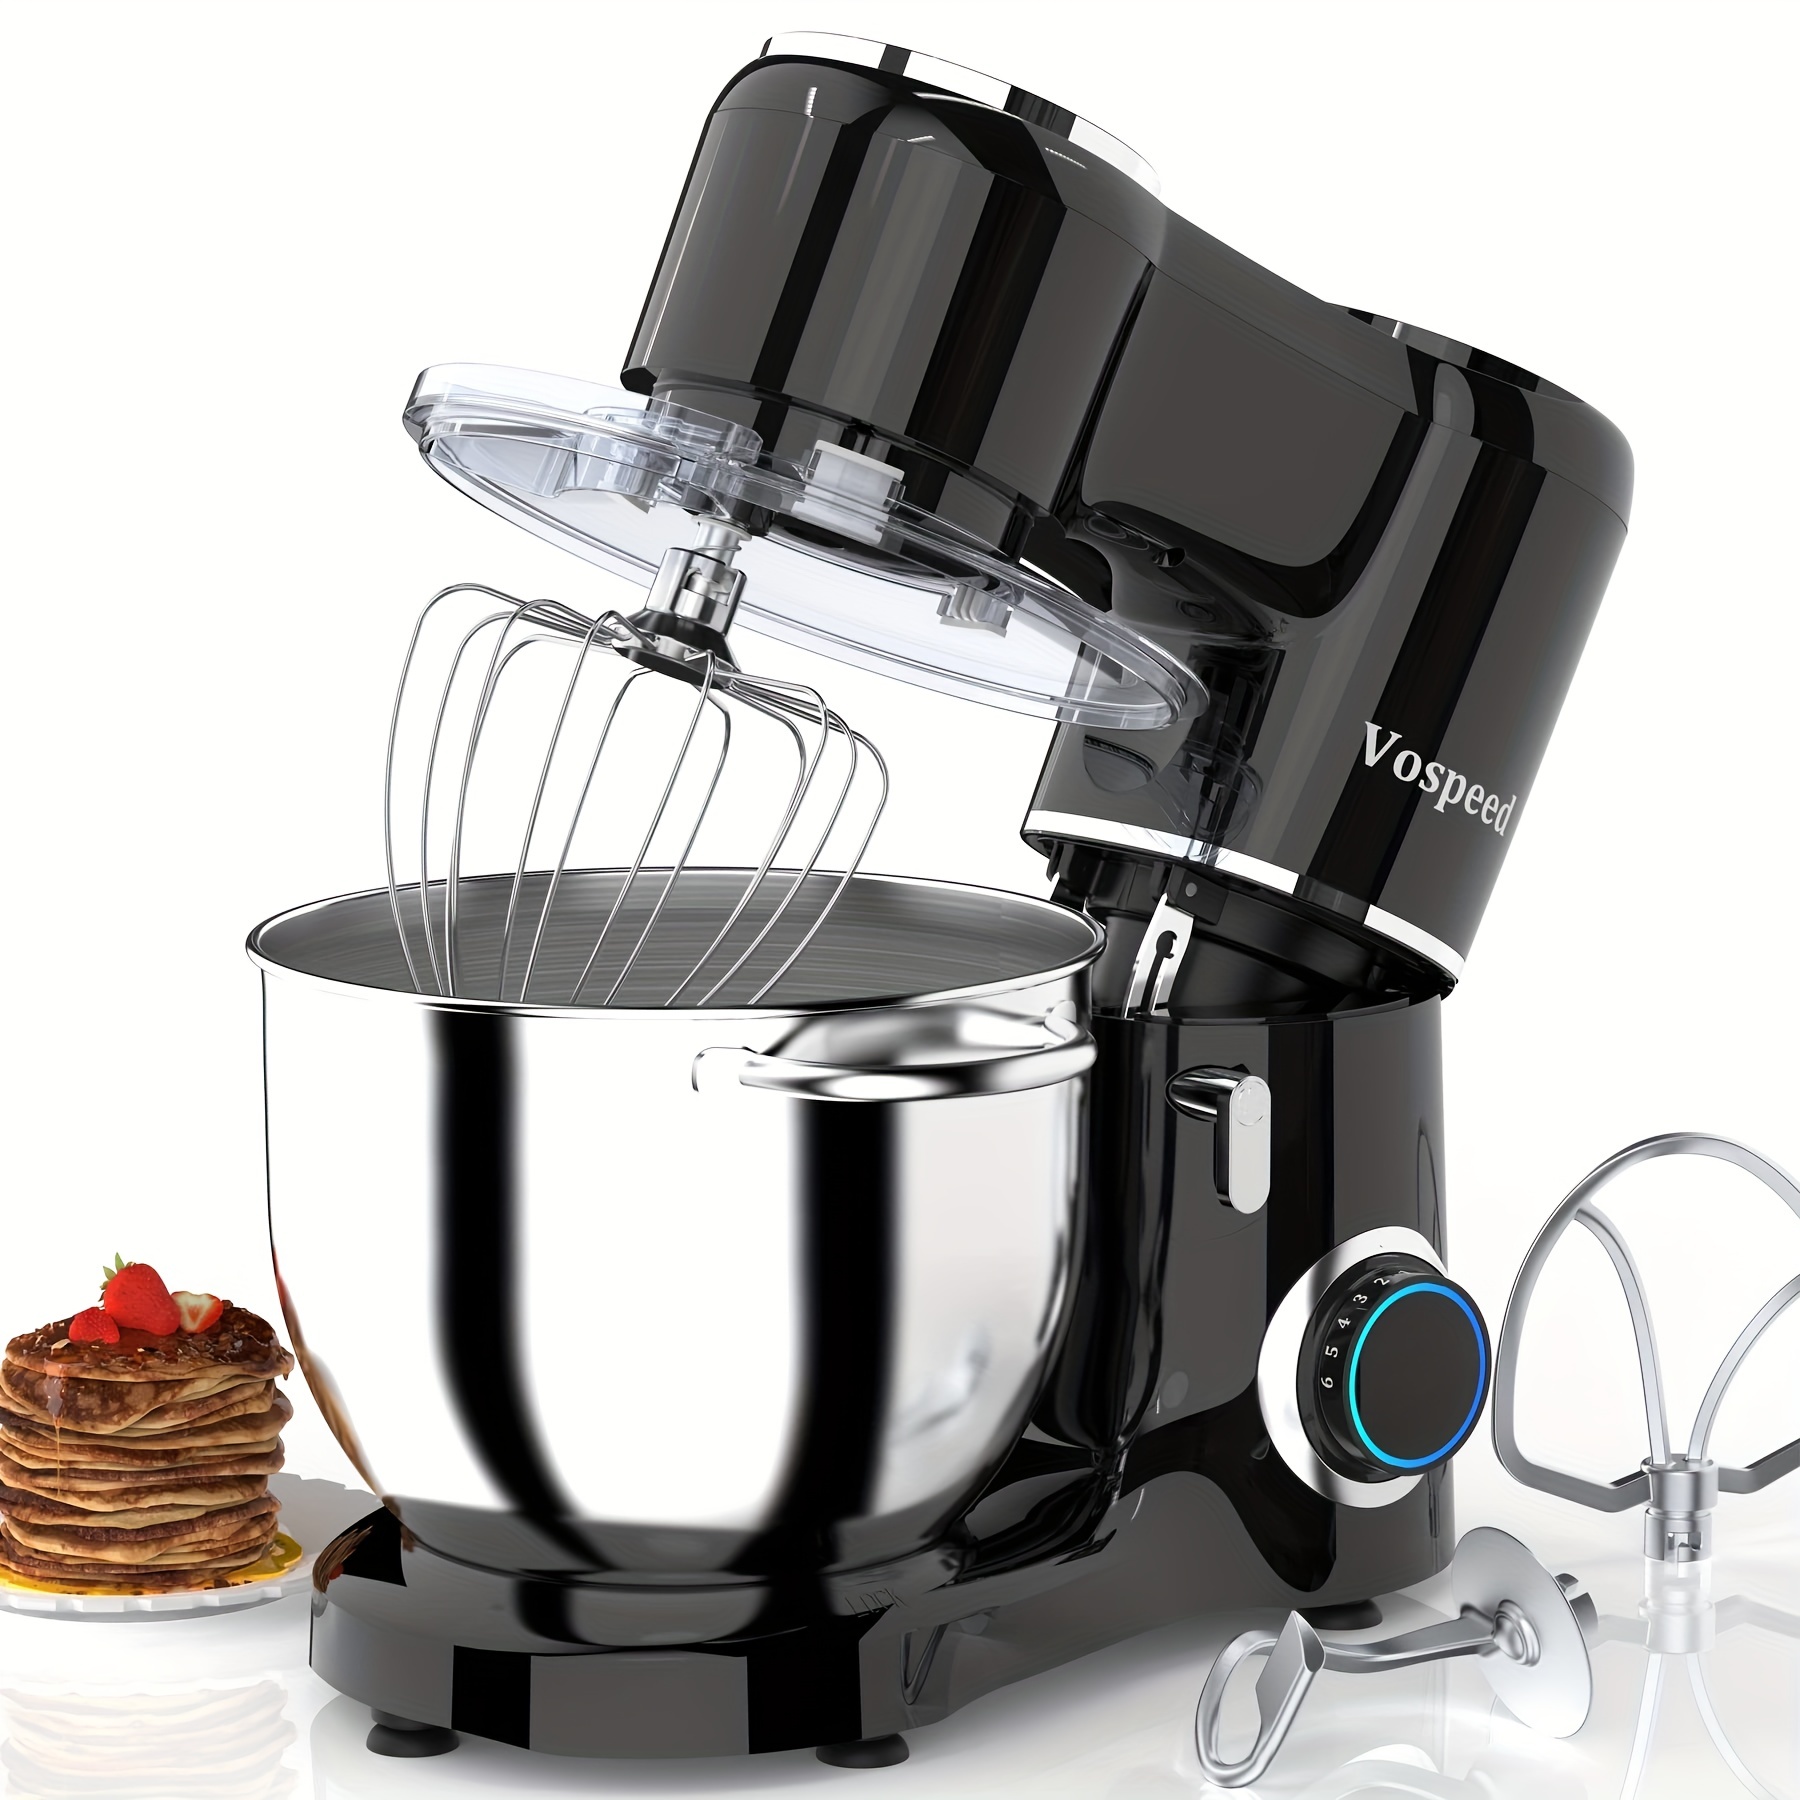  Howork Electric Stand Mixer,10+p Speeds With 6.5QT Stainless  Steel Bowl,Dough Hook, Wire Whip & Beater,for Most Home Cooks,Black: Home &  Kitchen